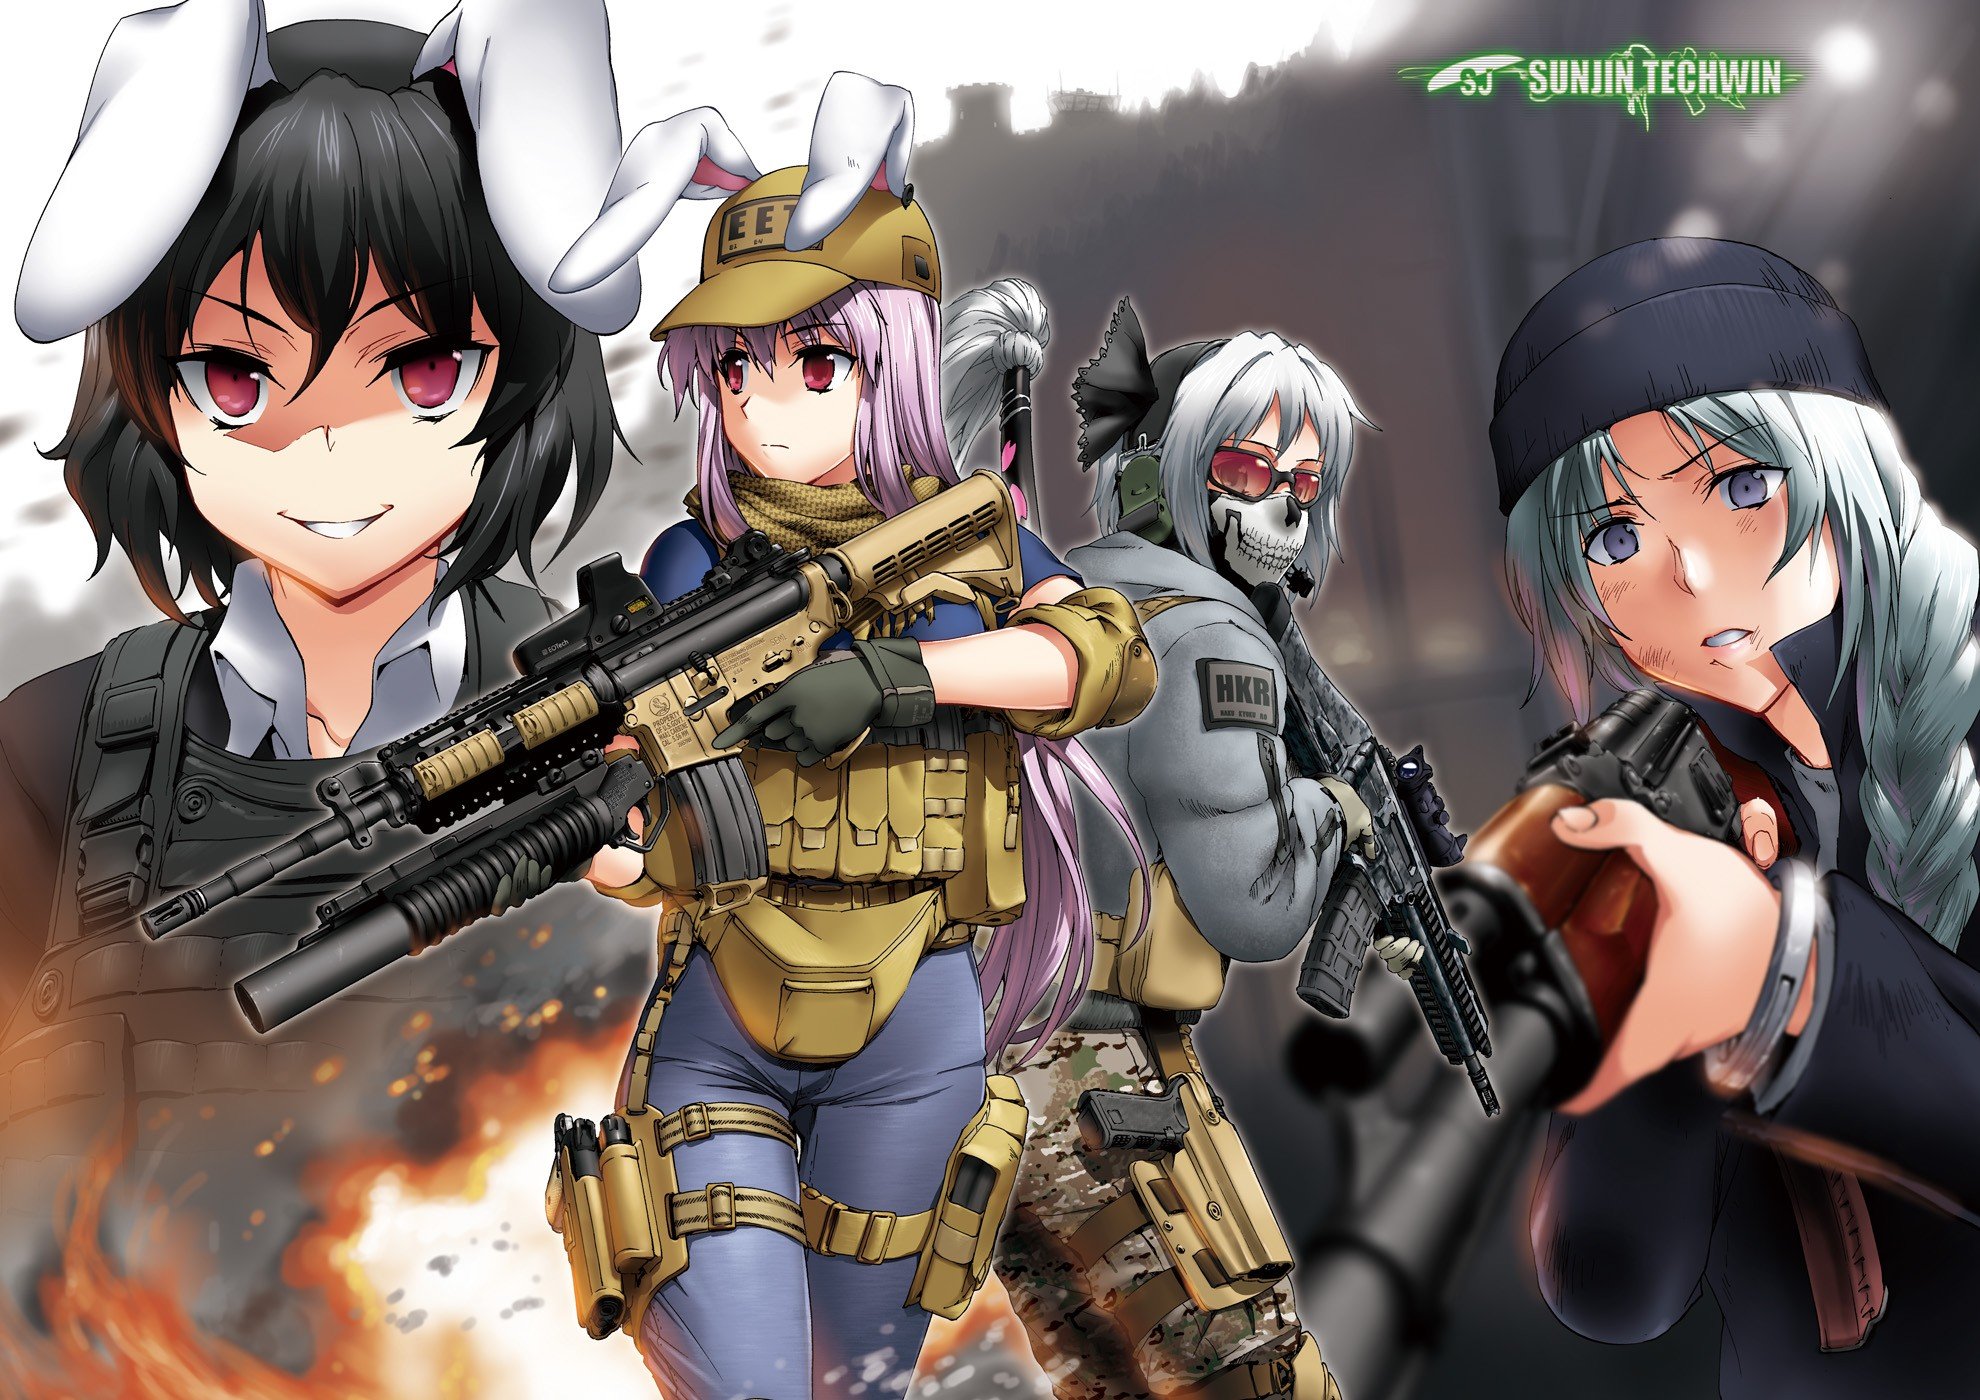 anime, Anime girls, Crossover, Call of Duty: Ghosts, Weapon, Bunny ears, Touhou Wallpaper